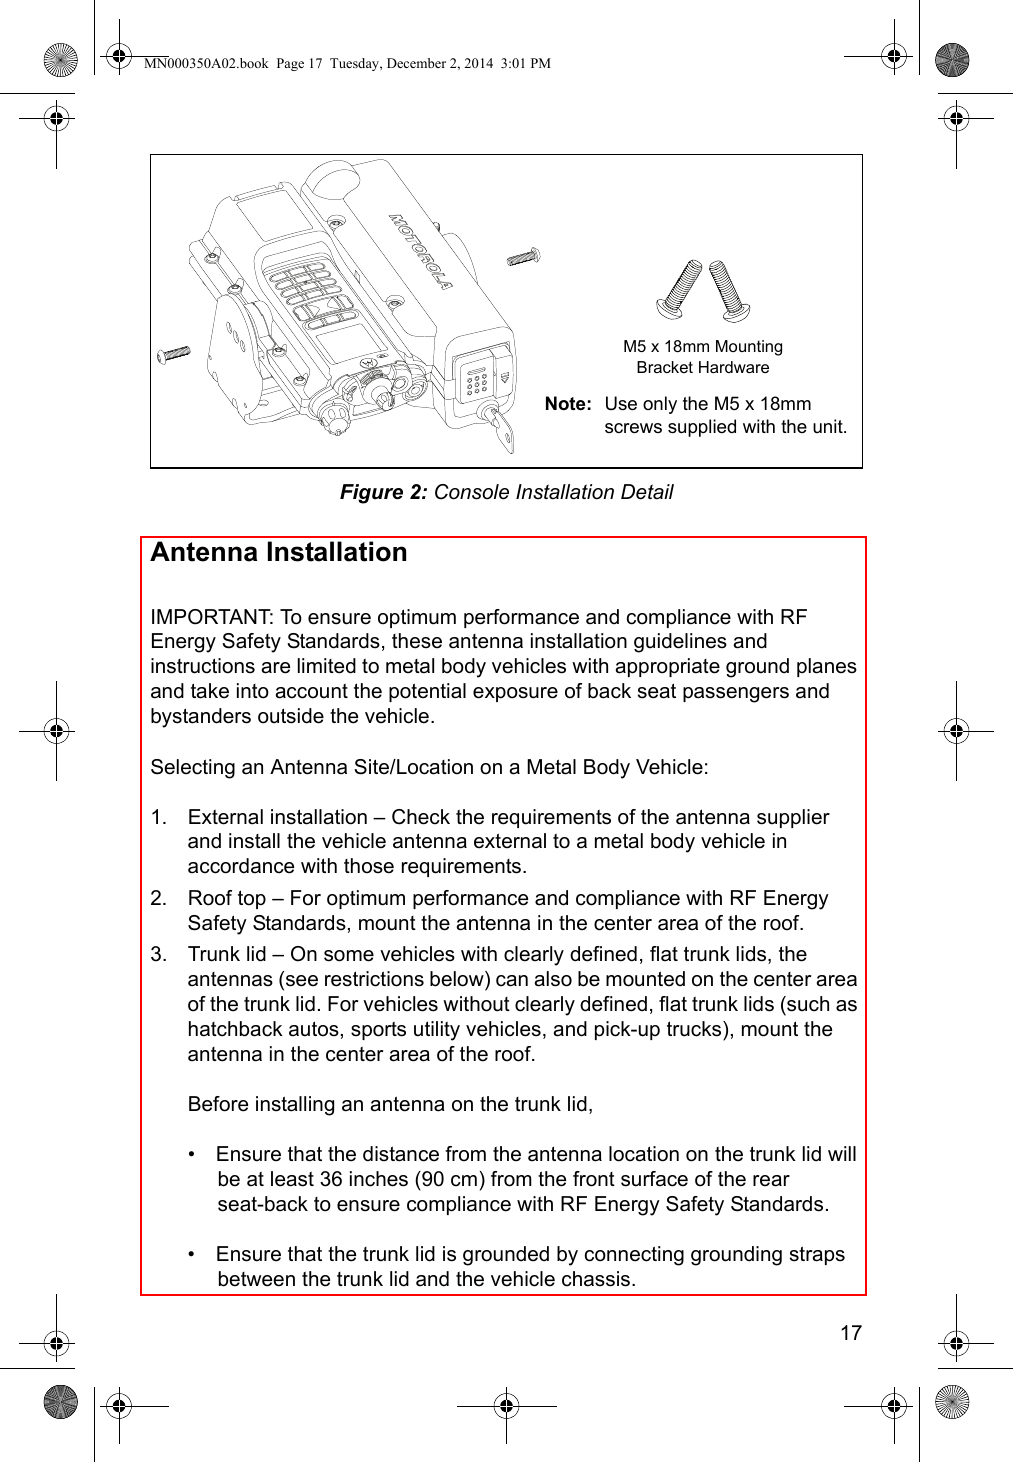 17Figure 2: Console Installation DetailAntenna InstallationIMPORTANT: To ensure optimum performance and compliance with RF Energy Safety Standards, these antenna installation guidelines and instructions are limited to metal body vehicles with appropriate ground planes and take into account the potential exposure of back seat passengers and bystanders outside the vehicle.Selecting an Antenna Site/Location on a Metal Body Vehicle:1. External installation – Check the requirements of the antenna supplier and install the vehicle antenna external to a metal body vehicle in accordance with those requirements.2. Roof top – For optimum performance and compliance with RF Energy Safety Standards, mount the antenna in the center area of the roof.3. Trunk lid – On some vehicles with clearly defined, flat trunk lids, the antennas (see restrictions below) can also be mounted on the center area of the trunk lid. For vehicles without clearly defined, flat trunk lids (such as hatchback autos, sports utility vehicles, and pick-up trucks), mount the antenna in the center area of the roof.Before installing an antenna on the trunk lid,•  Ensure that the distance from the antenna location on the trunk lid will be at least 36 inches (90 cm) from the front surface of the rear  seat-back to ensure compliance with RF Energy Safety Standards.•  Ensure that the trunk lid is grounded by connecting grounding straps between the trunk lid and the vehicle chassis.Note: Use only the M5 x 18mm screws supplied with the unit.M5 x 18mm MountingBracket HardwareMN000350A02.book  Page 17  Tuesday, December 2, 2014  3:01 PM